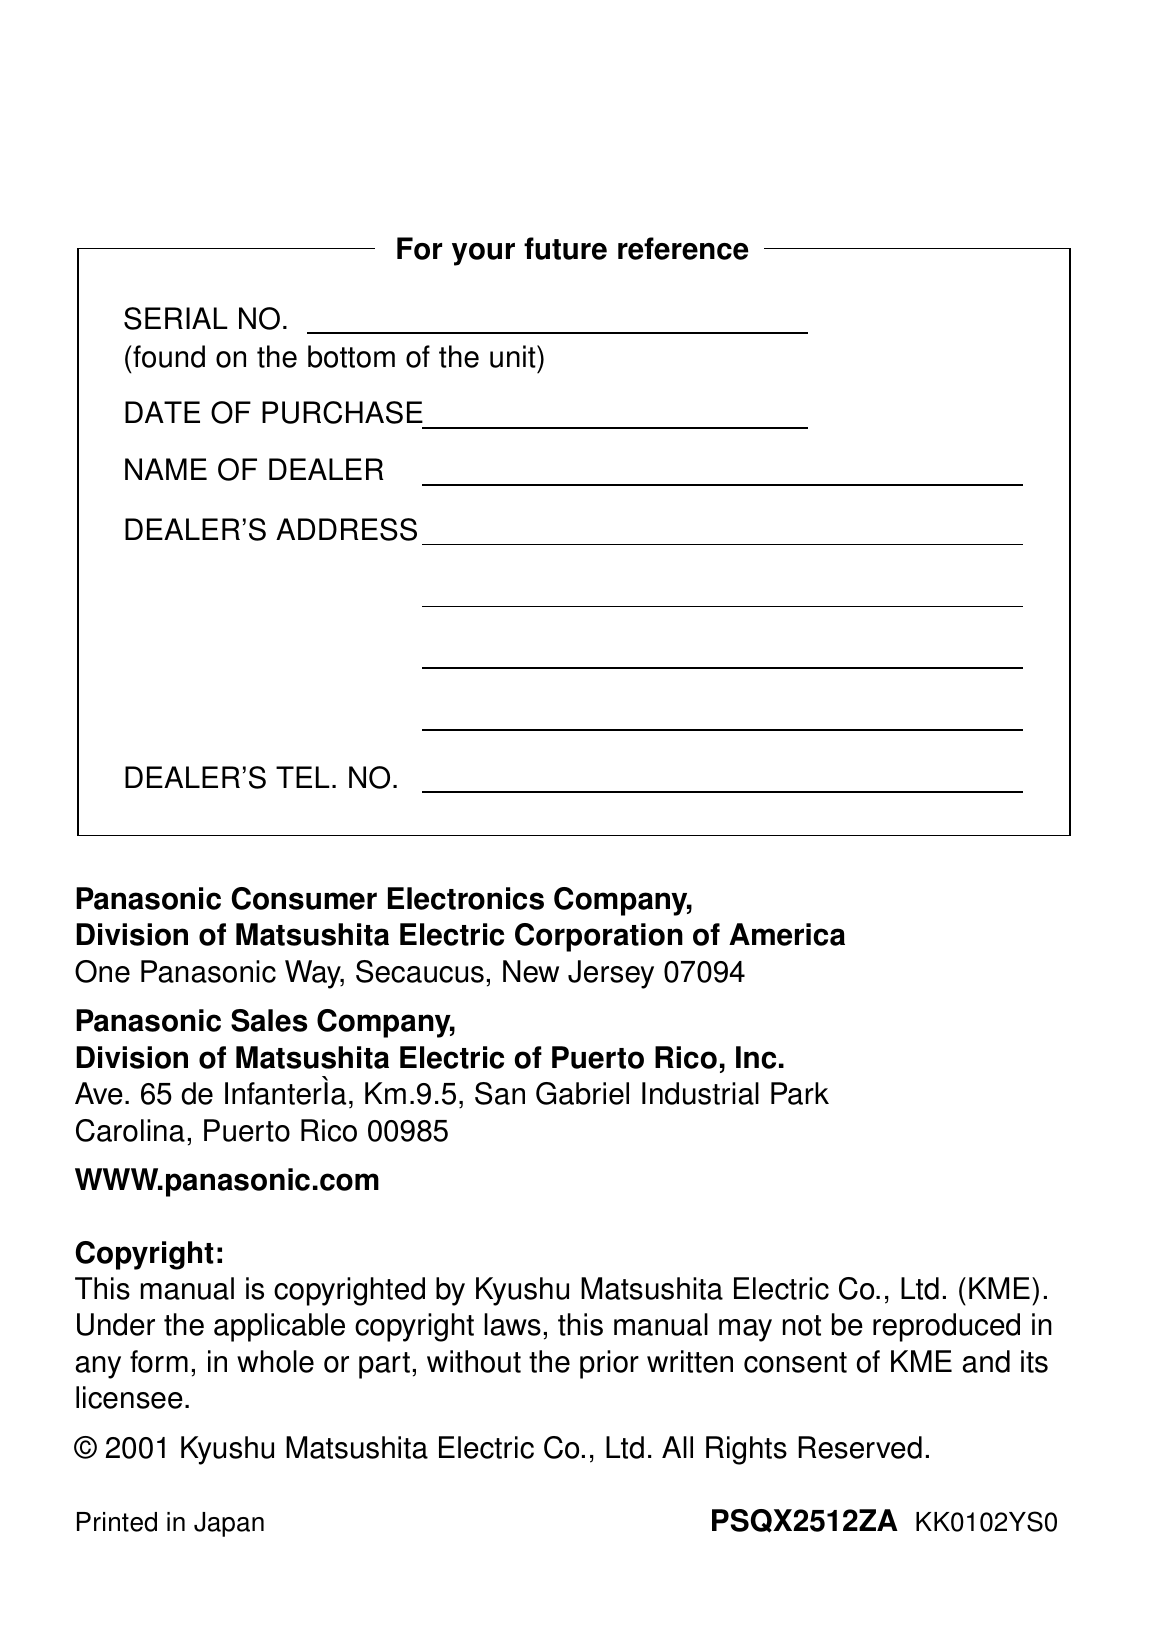 Panasonic Consumer Electronics Company, Division of Matsushita Electric Corporation of AmericaOne Panasonic Way, Secaucus, New Jersey 07094Panasonic Sales Company,Division of Matsushita Electric of Puerto Rico, Inc.Ave. 65 de InfanterÌa, Km.9.5, San Gabriel Industrial ParkCarolina, Puerto Rico 00985WWW.panasonic.comCopyright:This manual is copyrighted by Kyushu Matsushita Electric Co., Ltd. (KME).Under the applicable copyright laws, this manual may not be reproduced in any form, in whole or part, without the prior written consent of KME and its licensee.© 2001 Kyushu Matsushita Electric Co., Ltd. All Rights Reserved.Printed in Japan PSQX2512ZA  KK0102YS0SERIAL NO.(found on the bottom of the unit)DATE OF PURCHASENAME OF DEALERDEALER’S ADDRESSDEALER’S TEL. NO.For your future reference